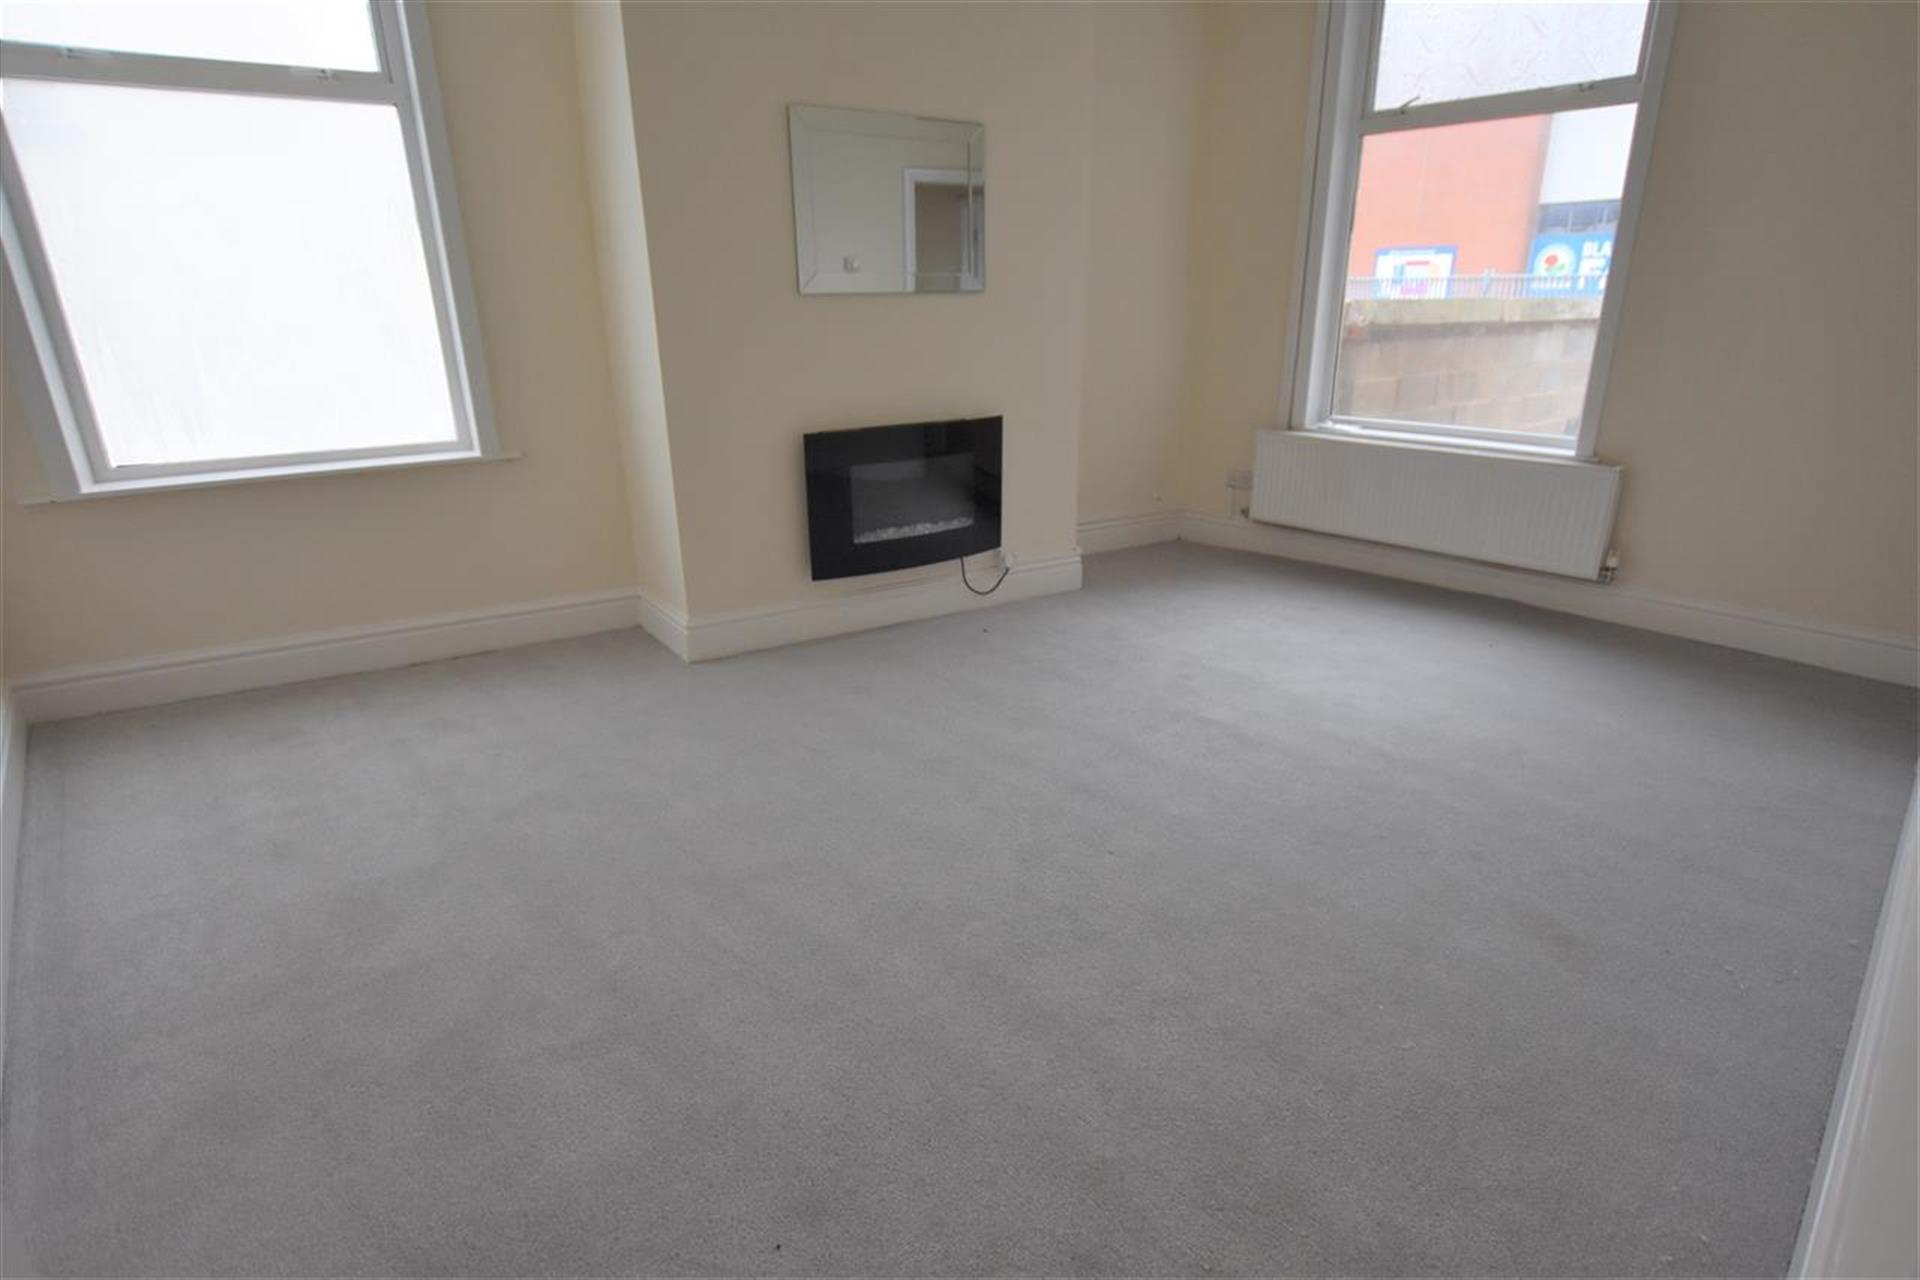 3 Bedroom End Terraced House To Rent - Reception Room 2